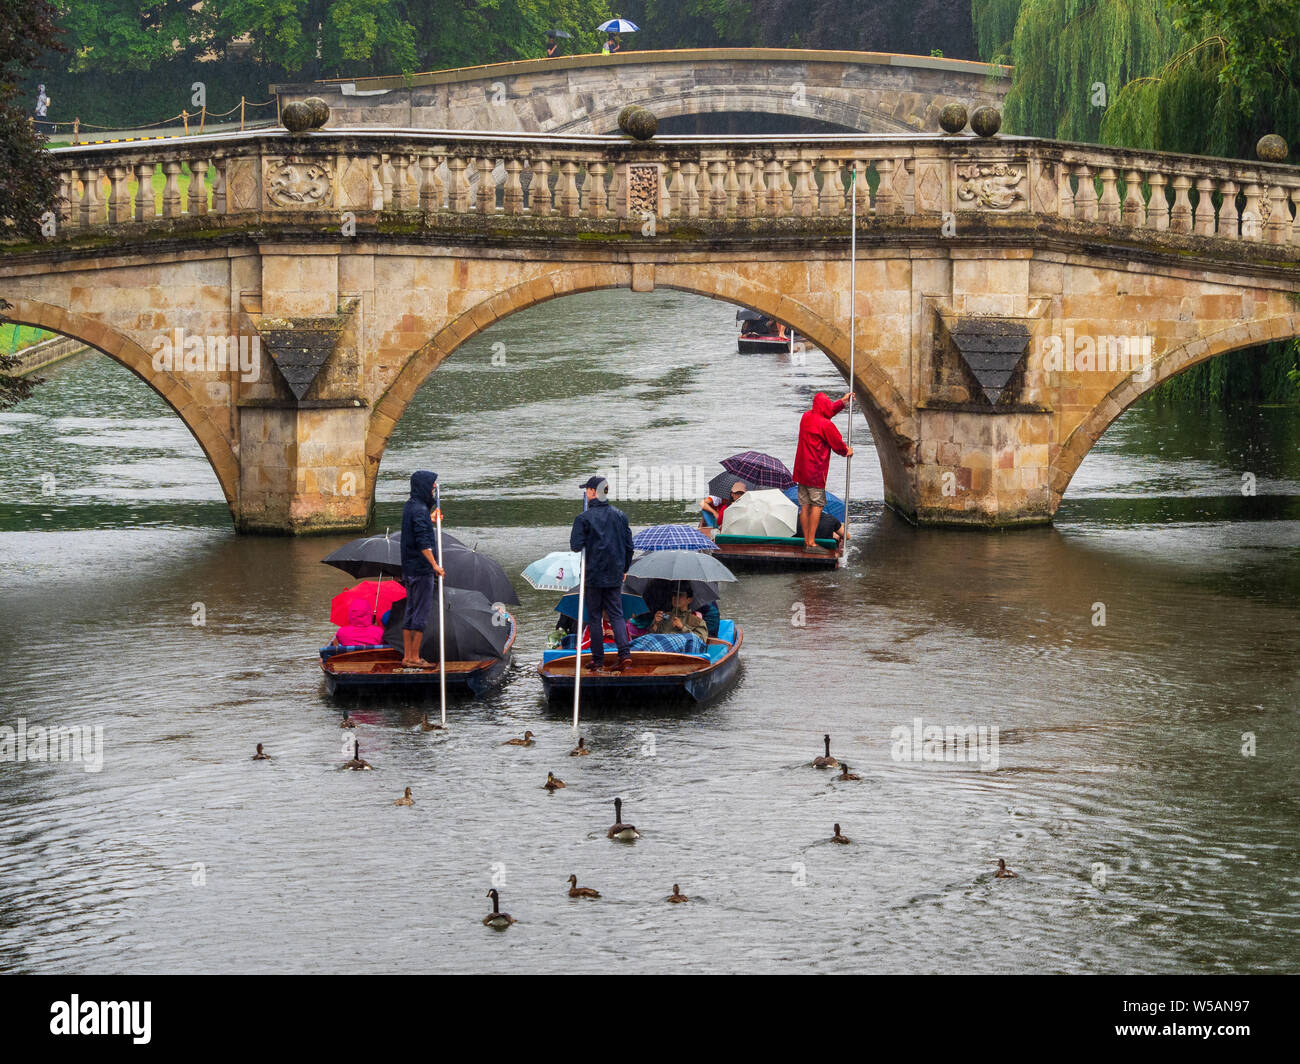 Punting in the Rain Cambridge  Ducks and geese follow punts full of tourists sheltering under umbrellas during heavy rain in Cambridge UK Stock Photo